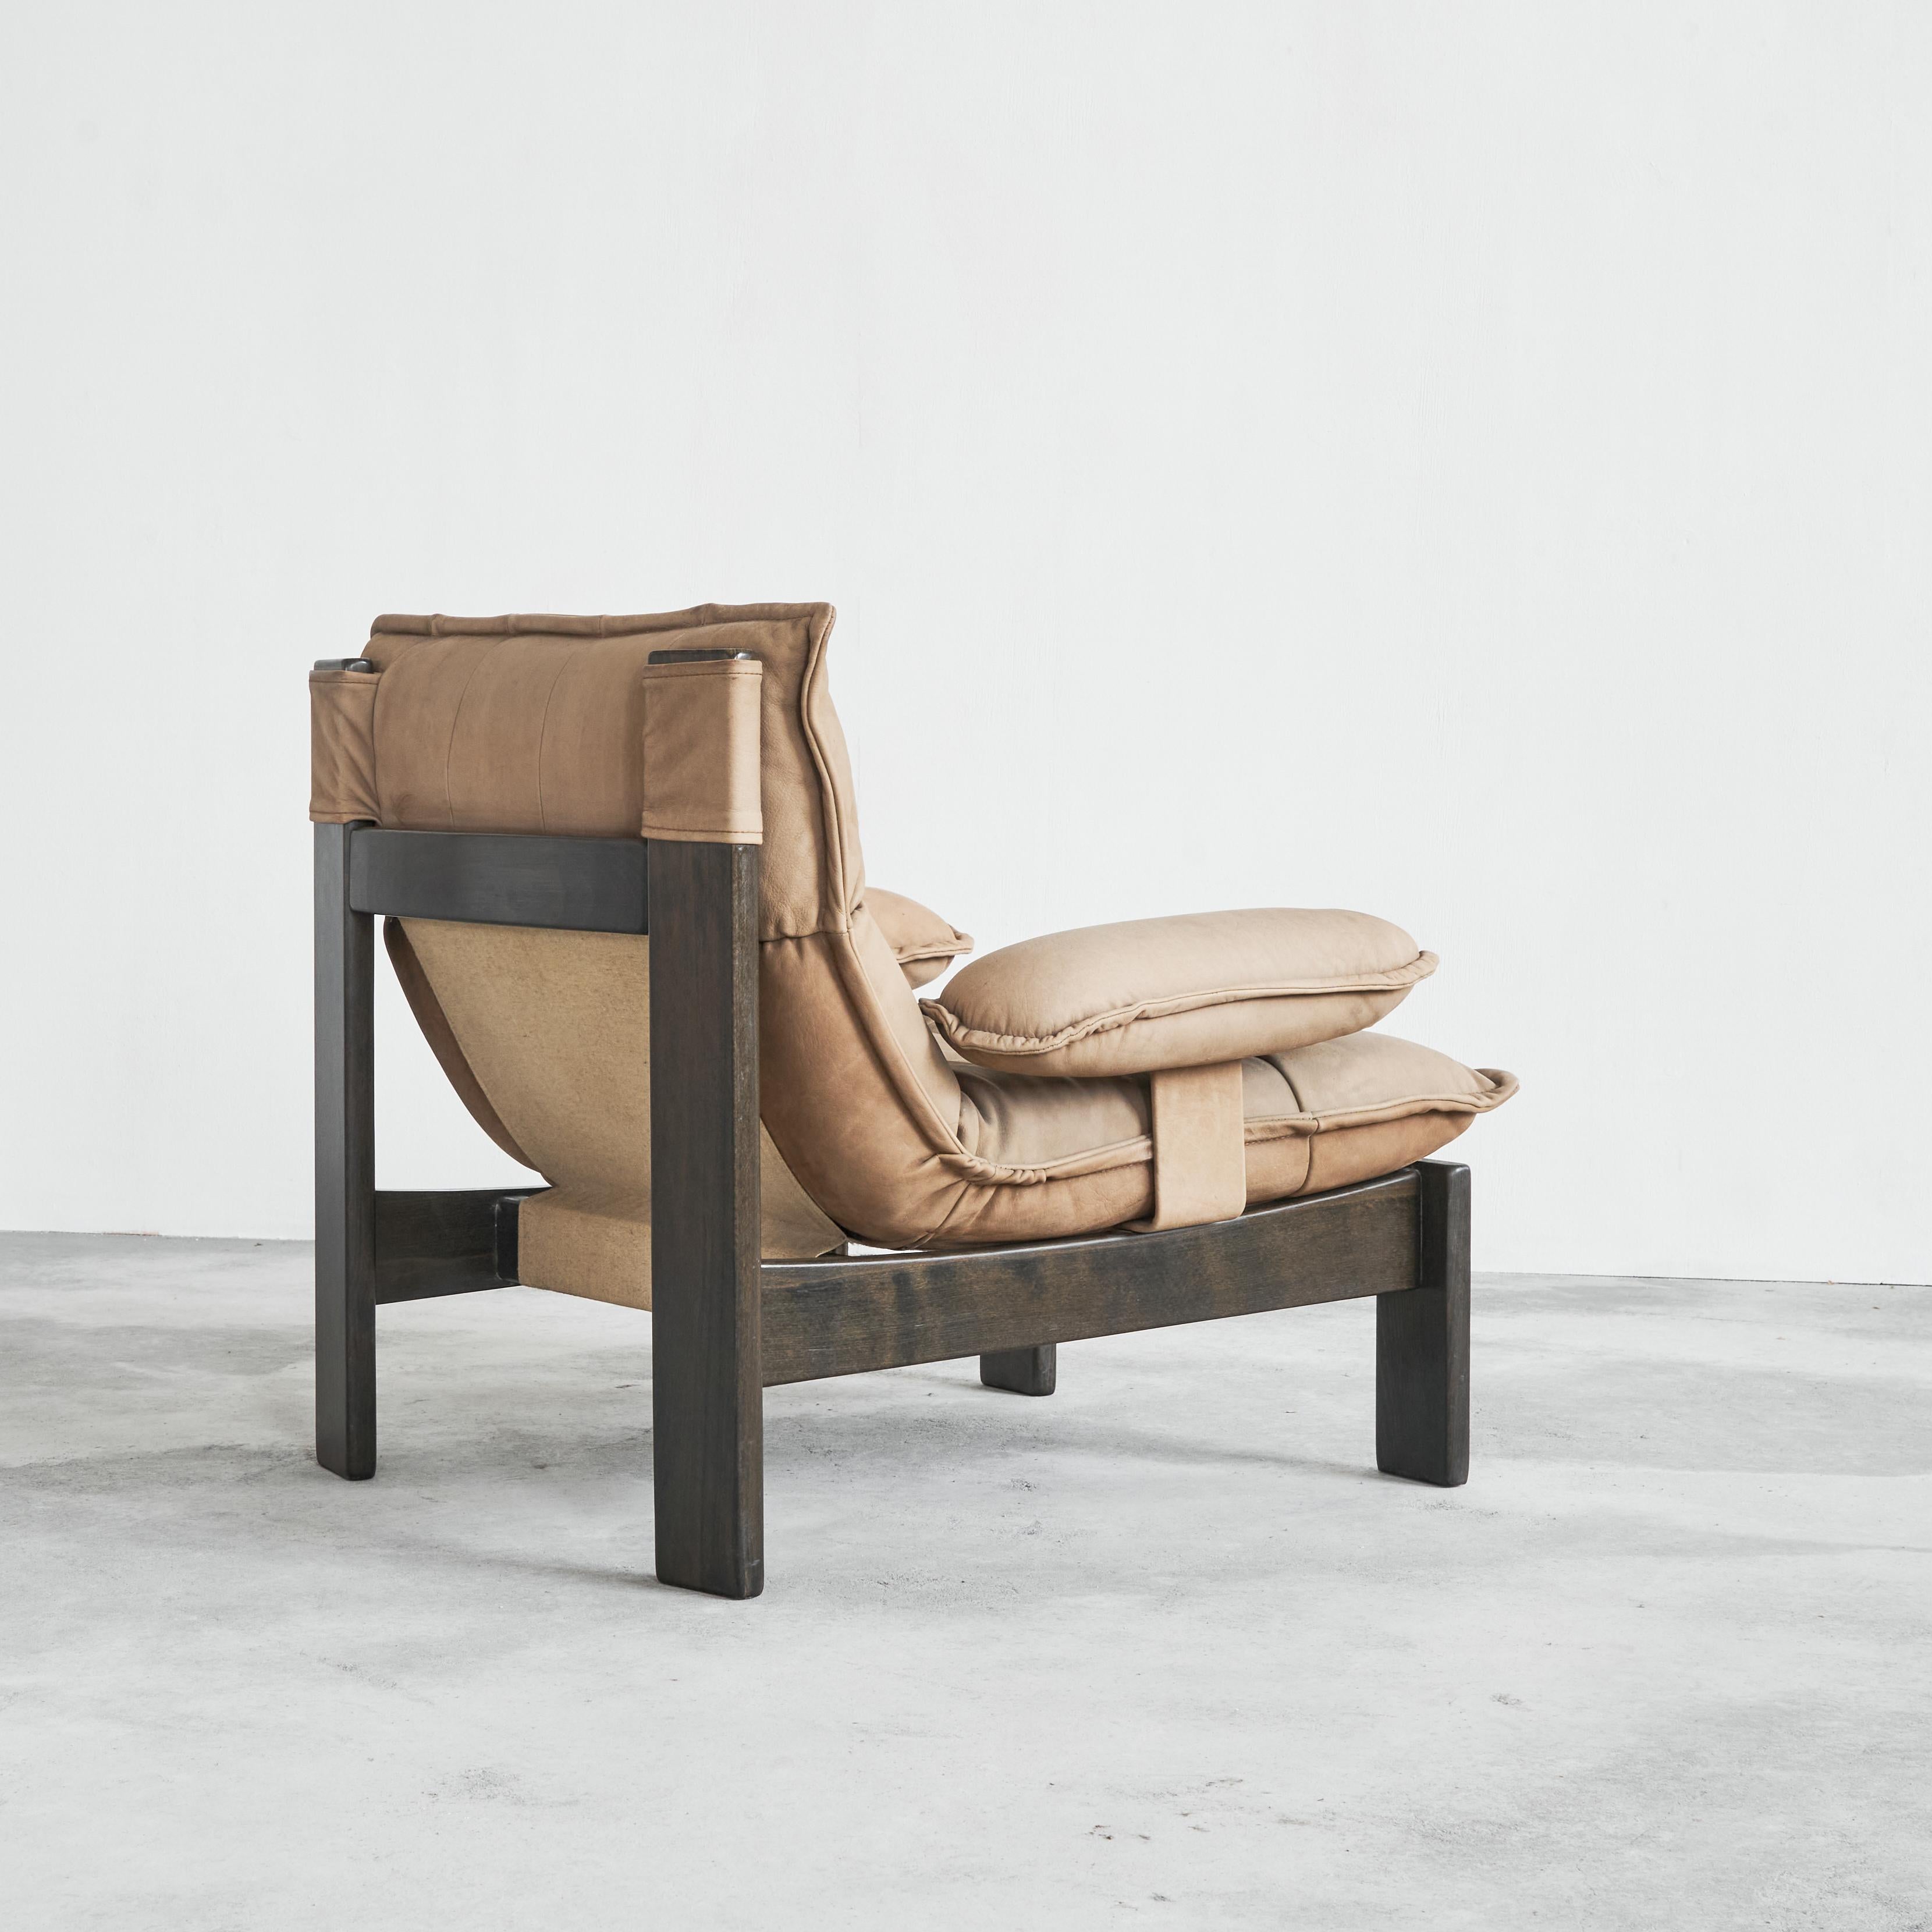 Hand-Crafted Lounge Chair in Camel Colored Suede and Stained Oak, 1970s